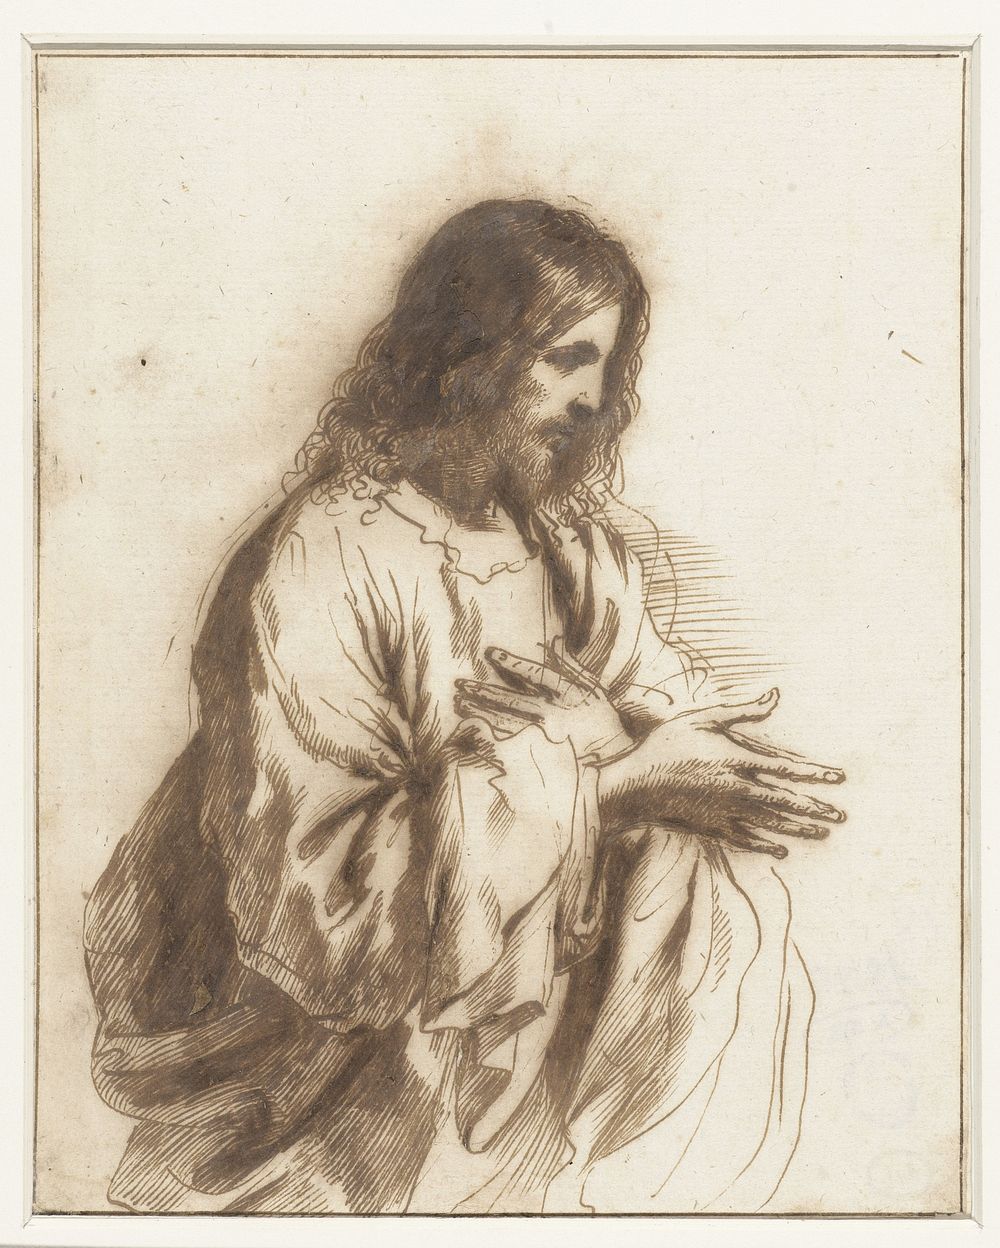 Christus (1601 - 1666) by Guercino